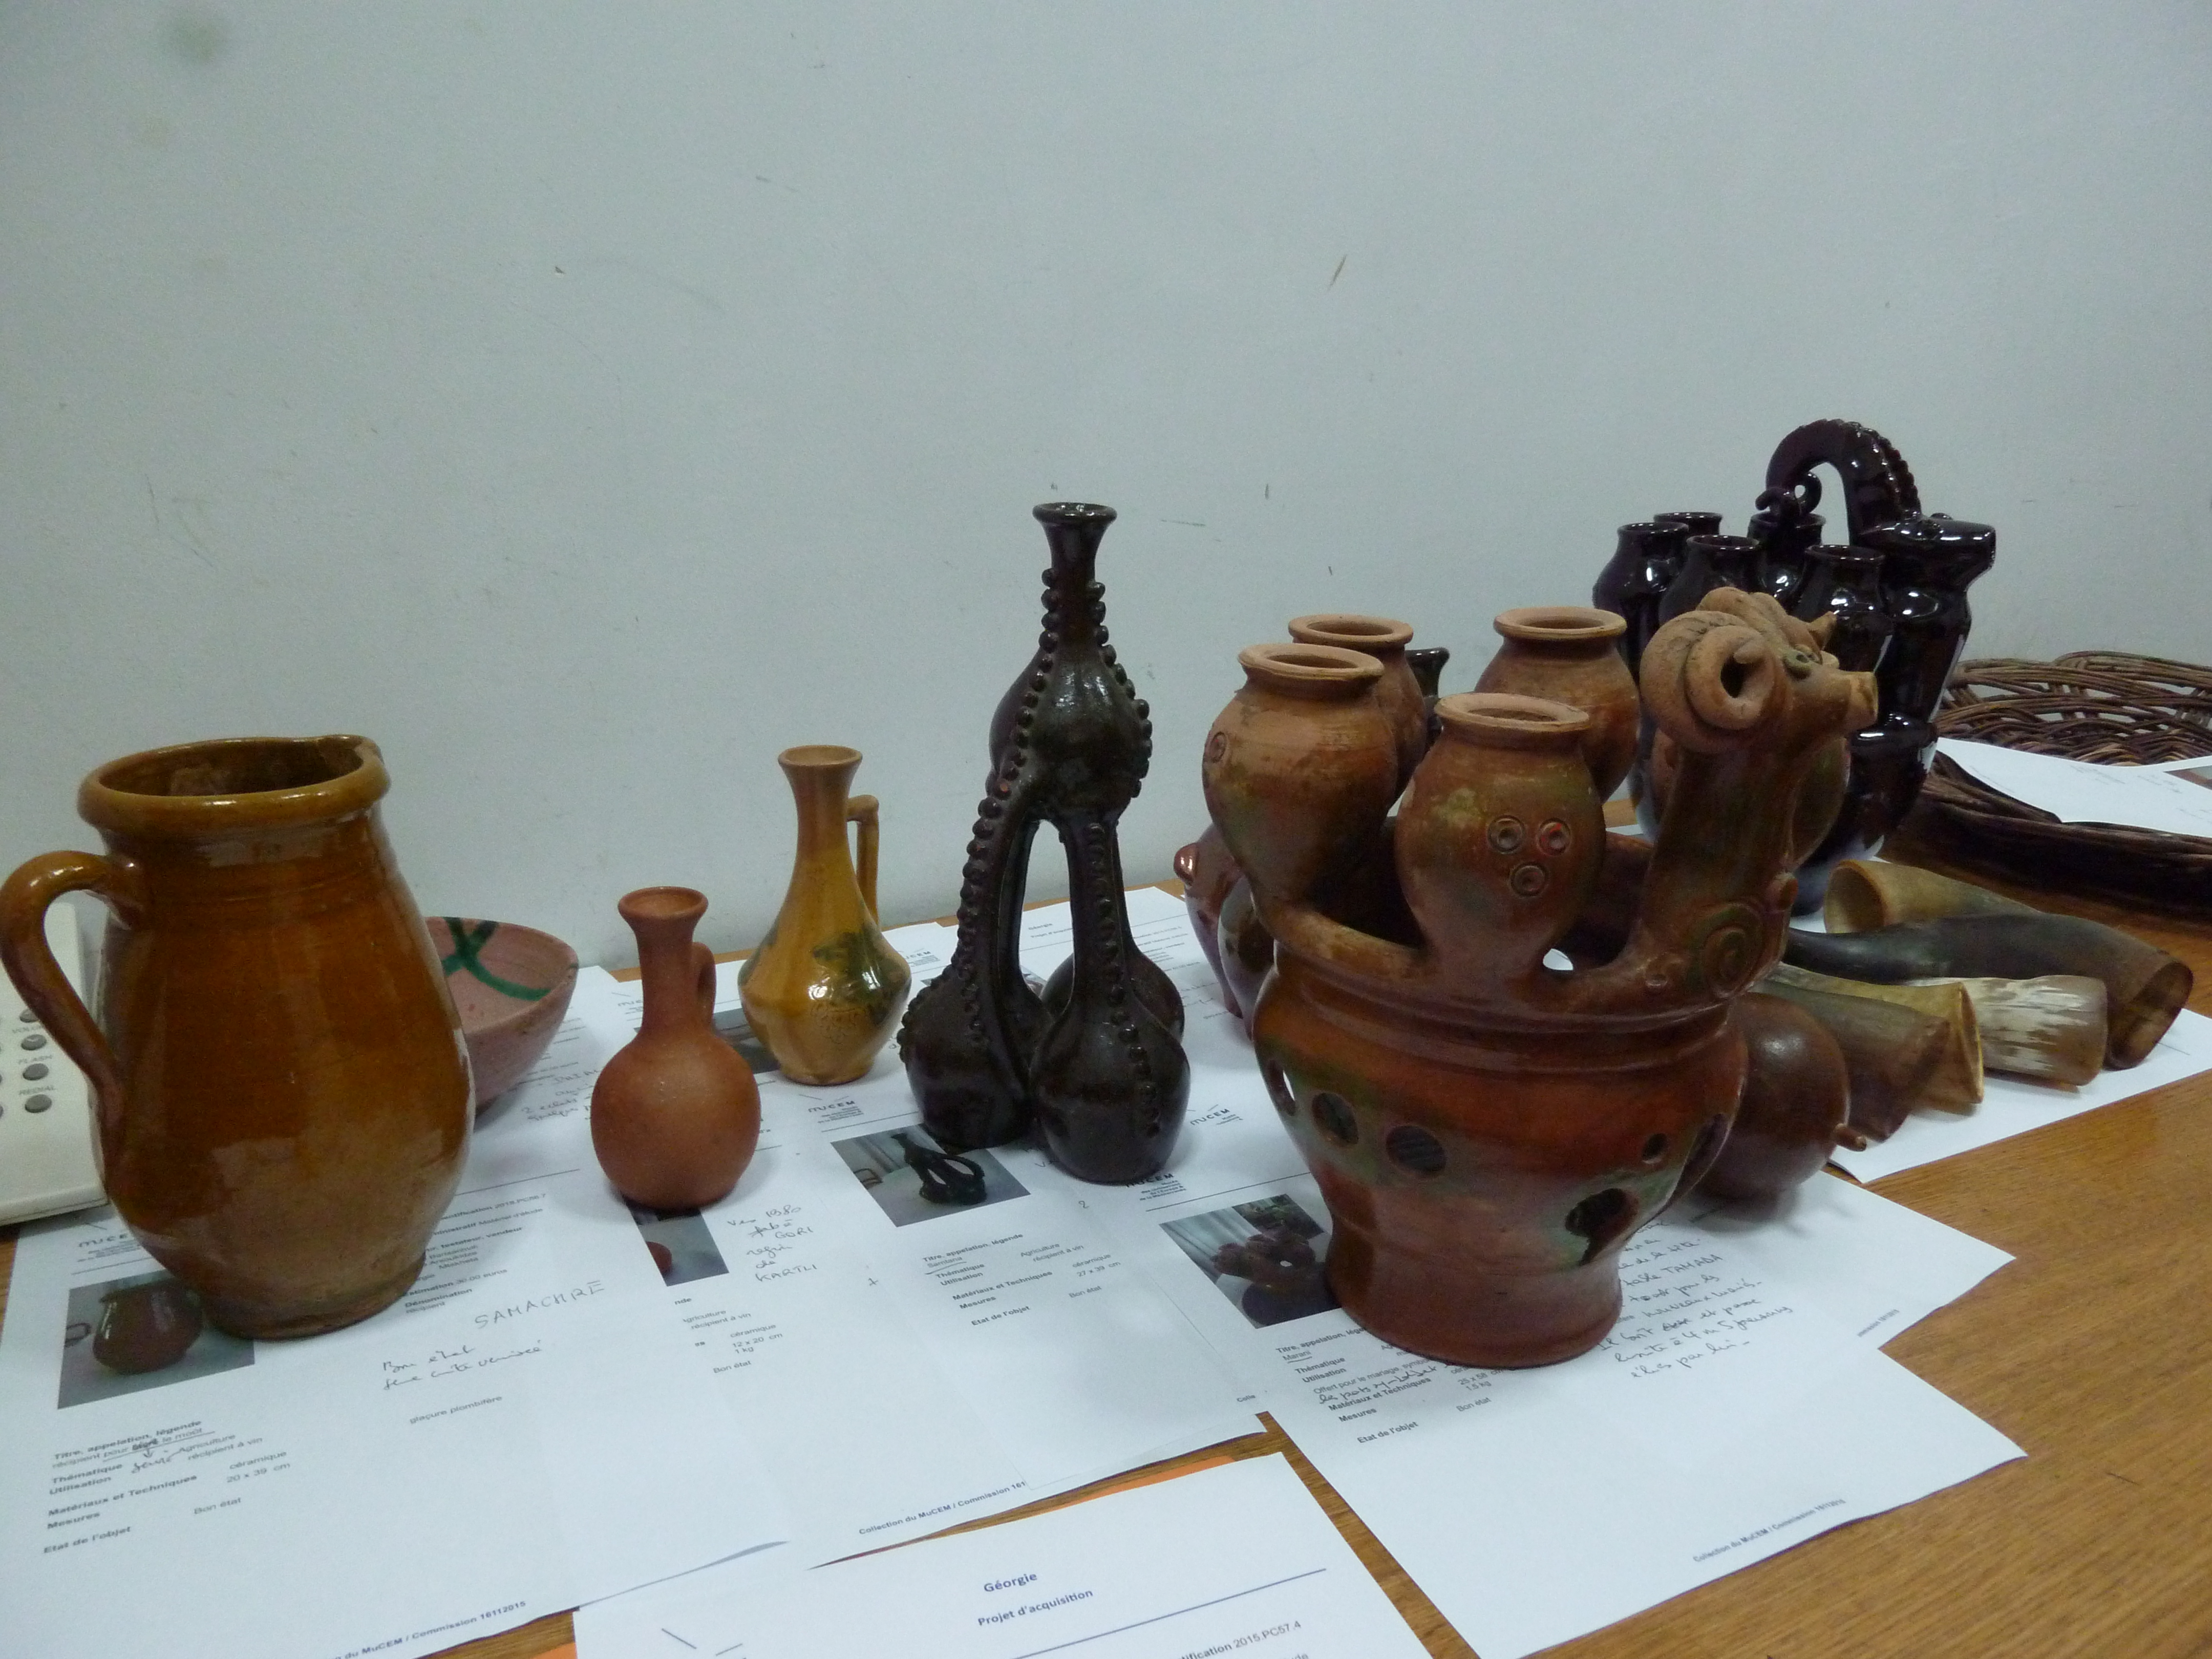 Preparation of an inventory of files of the objects collected on wine consumption in Kakhétie and Iméréthie (Géorgia), before their transport to Mucem. Collected by Merab Mikeladze, ethnologist, National Museum of Georgia, Tbilisi, October 2015.